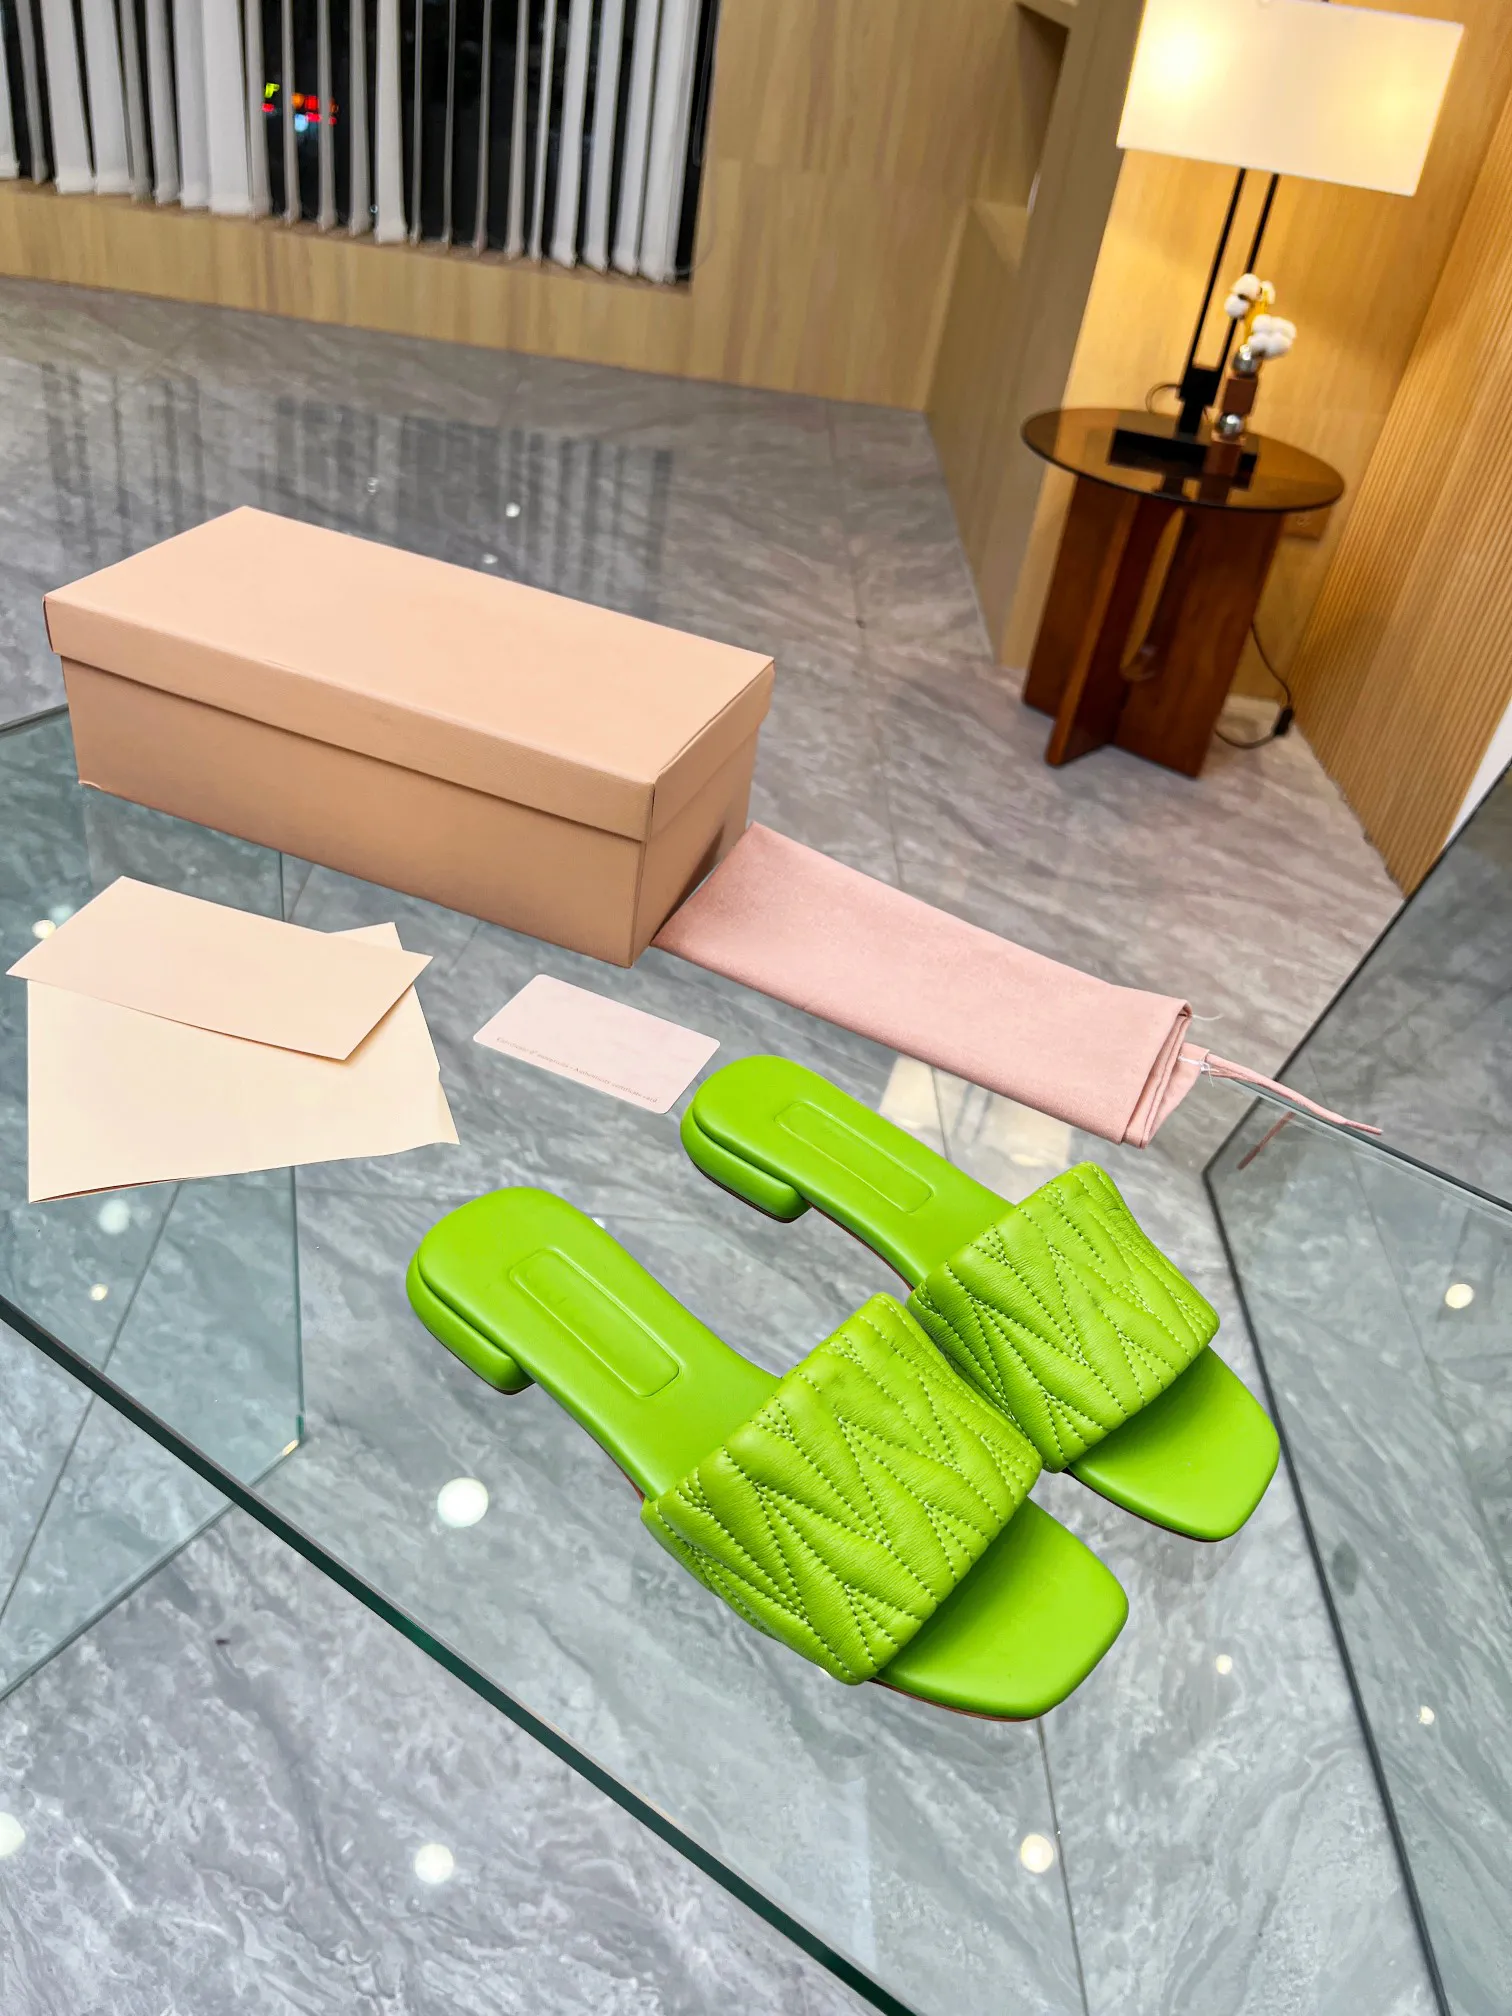 Top Quality luxuries designer Classics Women slipper Fashion Sandals Slides Summer Sexy real leather Ladies Beach platform slippers With box dust bag